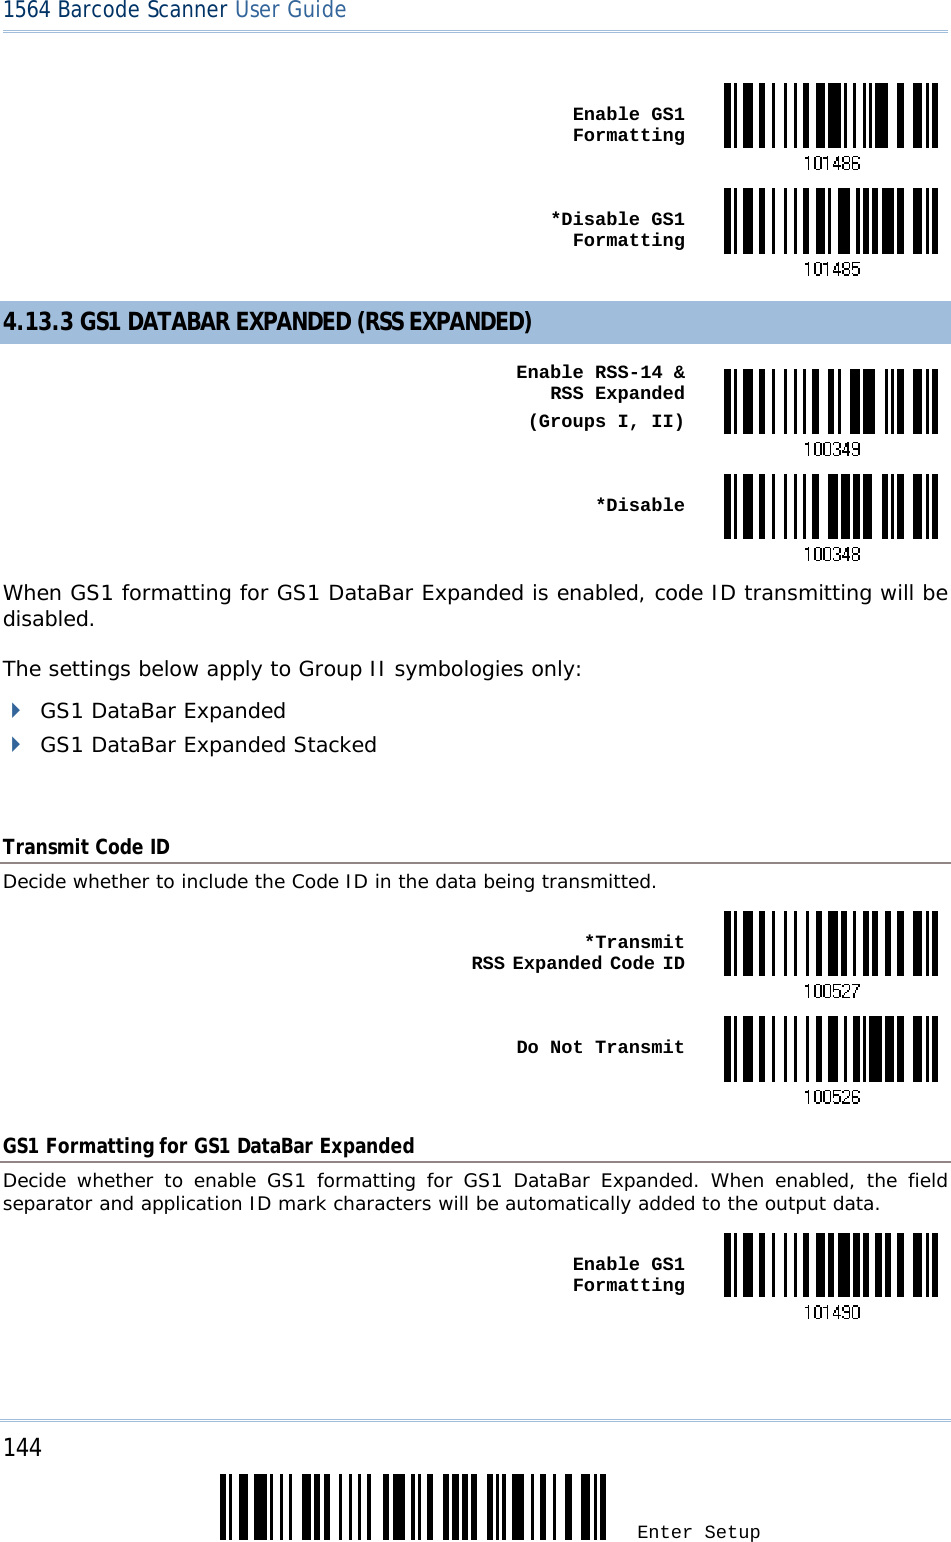 144 Enter Setup 1564 Barcode Scanner User Guide   Enable GS1 Formatting *Disable GS1 Formatting4.13.3 GS1 DATABAR EXPANDED (RSS EXPANDED)  Enable RSS-14 &amp;  RSS Expanded(Groups I, II) *DisableWhen GS1 formatting for GS1 DataBar Expanded is enabled, code ID transmitting will be disabled. The settings below apply to Group II symbologies only:  GS1 DataBar Expanded  GS1 DataBar Expanded Stacked  Transmit Code ID Decide whether to include the Code ID in the data being transmitted.  *Transmit  RSS Expanded Code ID Do Not TransmitGS1 Formatting for GS1 DataBar Expanded Decide whether to enable GS1 formatting for GS1 DataBar Expanded. When enabled, the field separator and application ID mark characters will be automatically added to the output data.  Enable GS1 Formatting